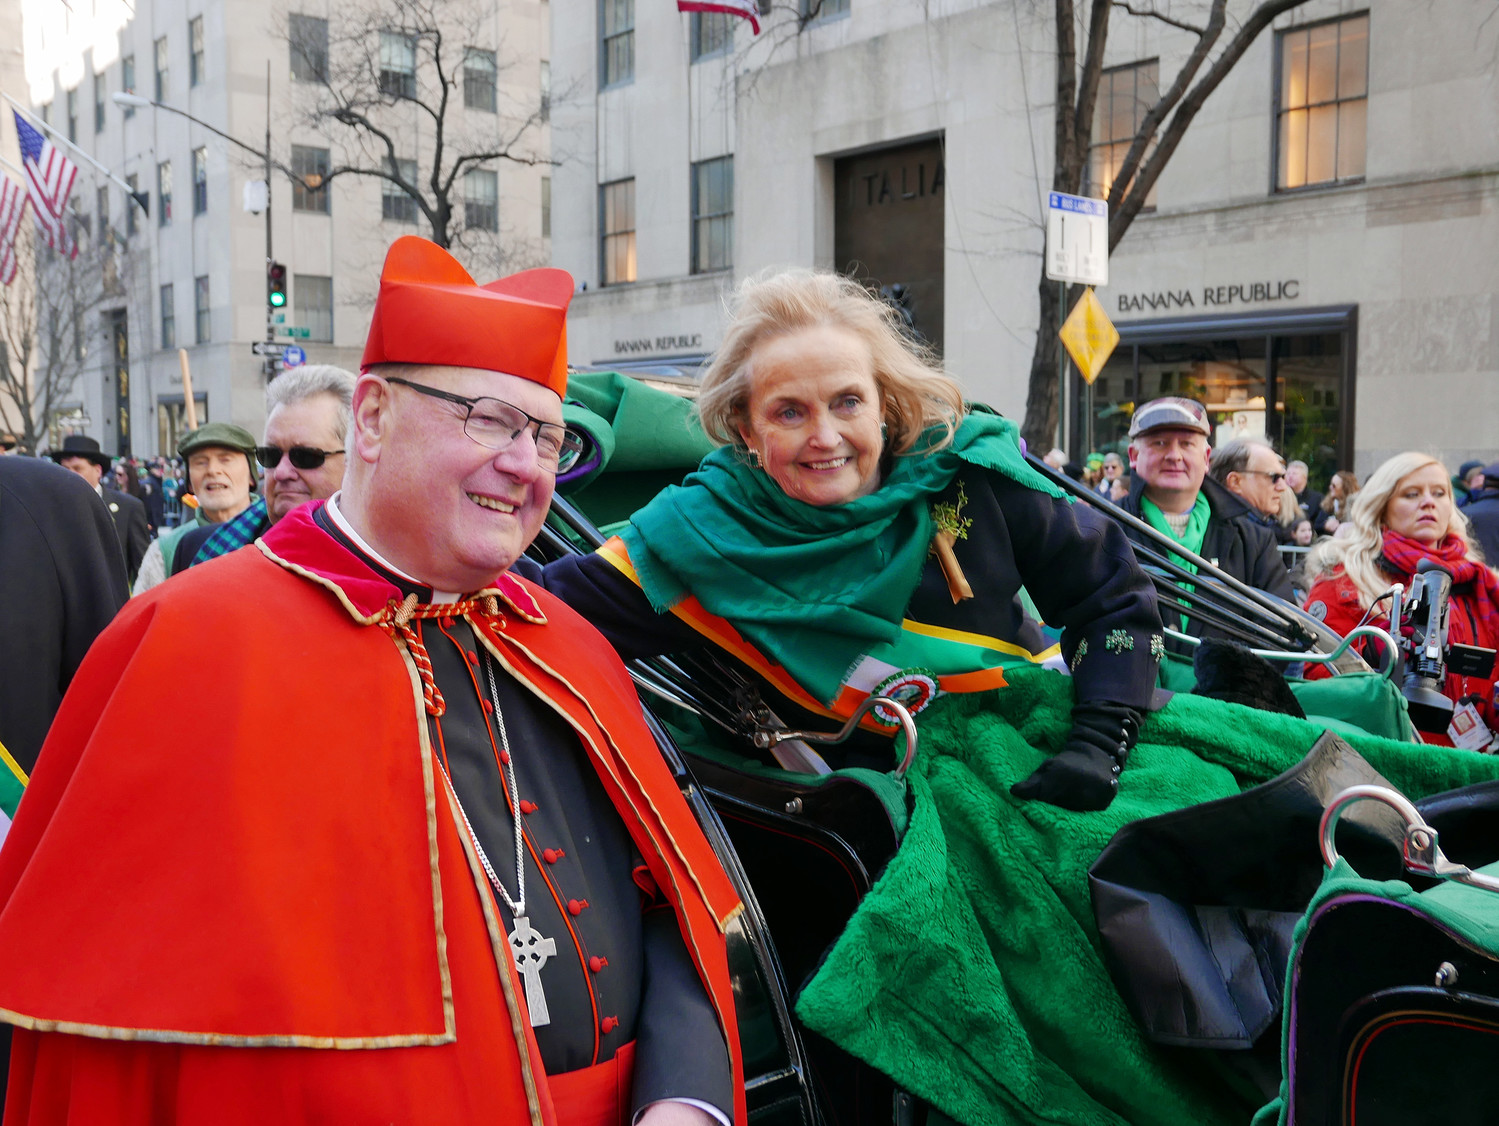 Cardinal Dolan greets Loretta Brennan Glucksman, the grand marshal of the 257th New York City St. Patrick’s Day Parade, who led the March 17 march up Fifth Avenue while riding with her grandson, Liam Picco, 15, in their favorite hansom cab.